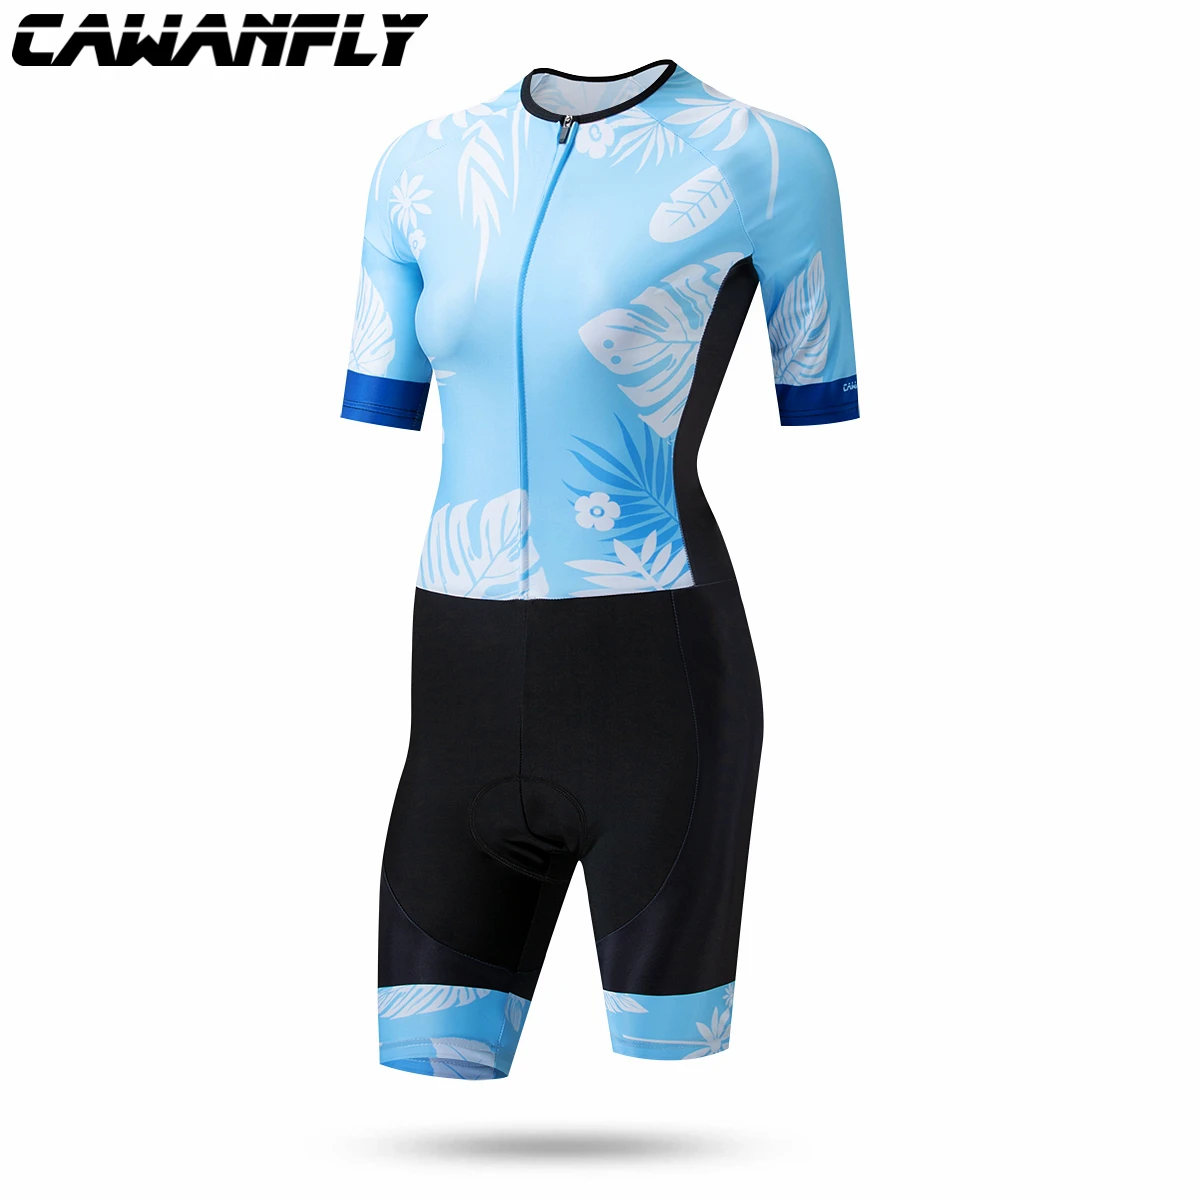 

cawanfly High Quality 100% Italy Lycra Pro Fabric Ropa Ciclismo Maillot Cycling Jersey Skinsuit Bike Clothing Triathlon Suit